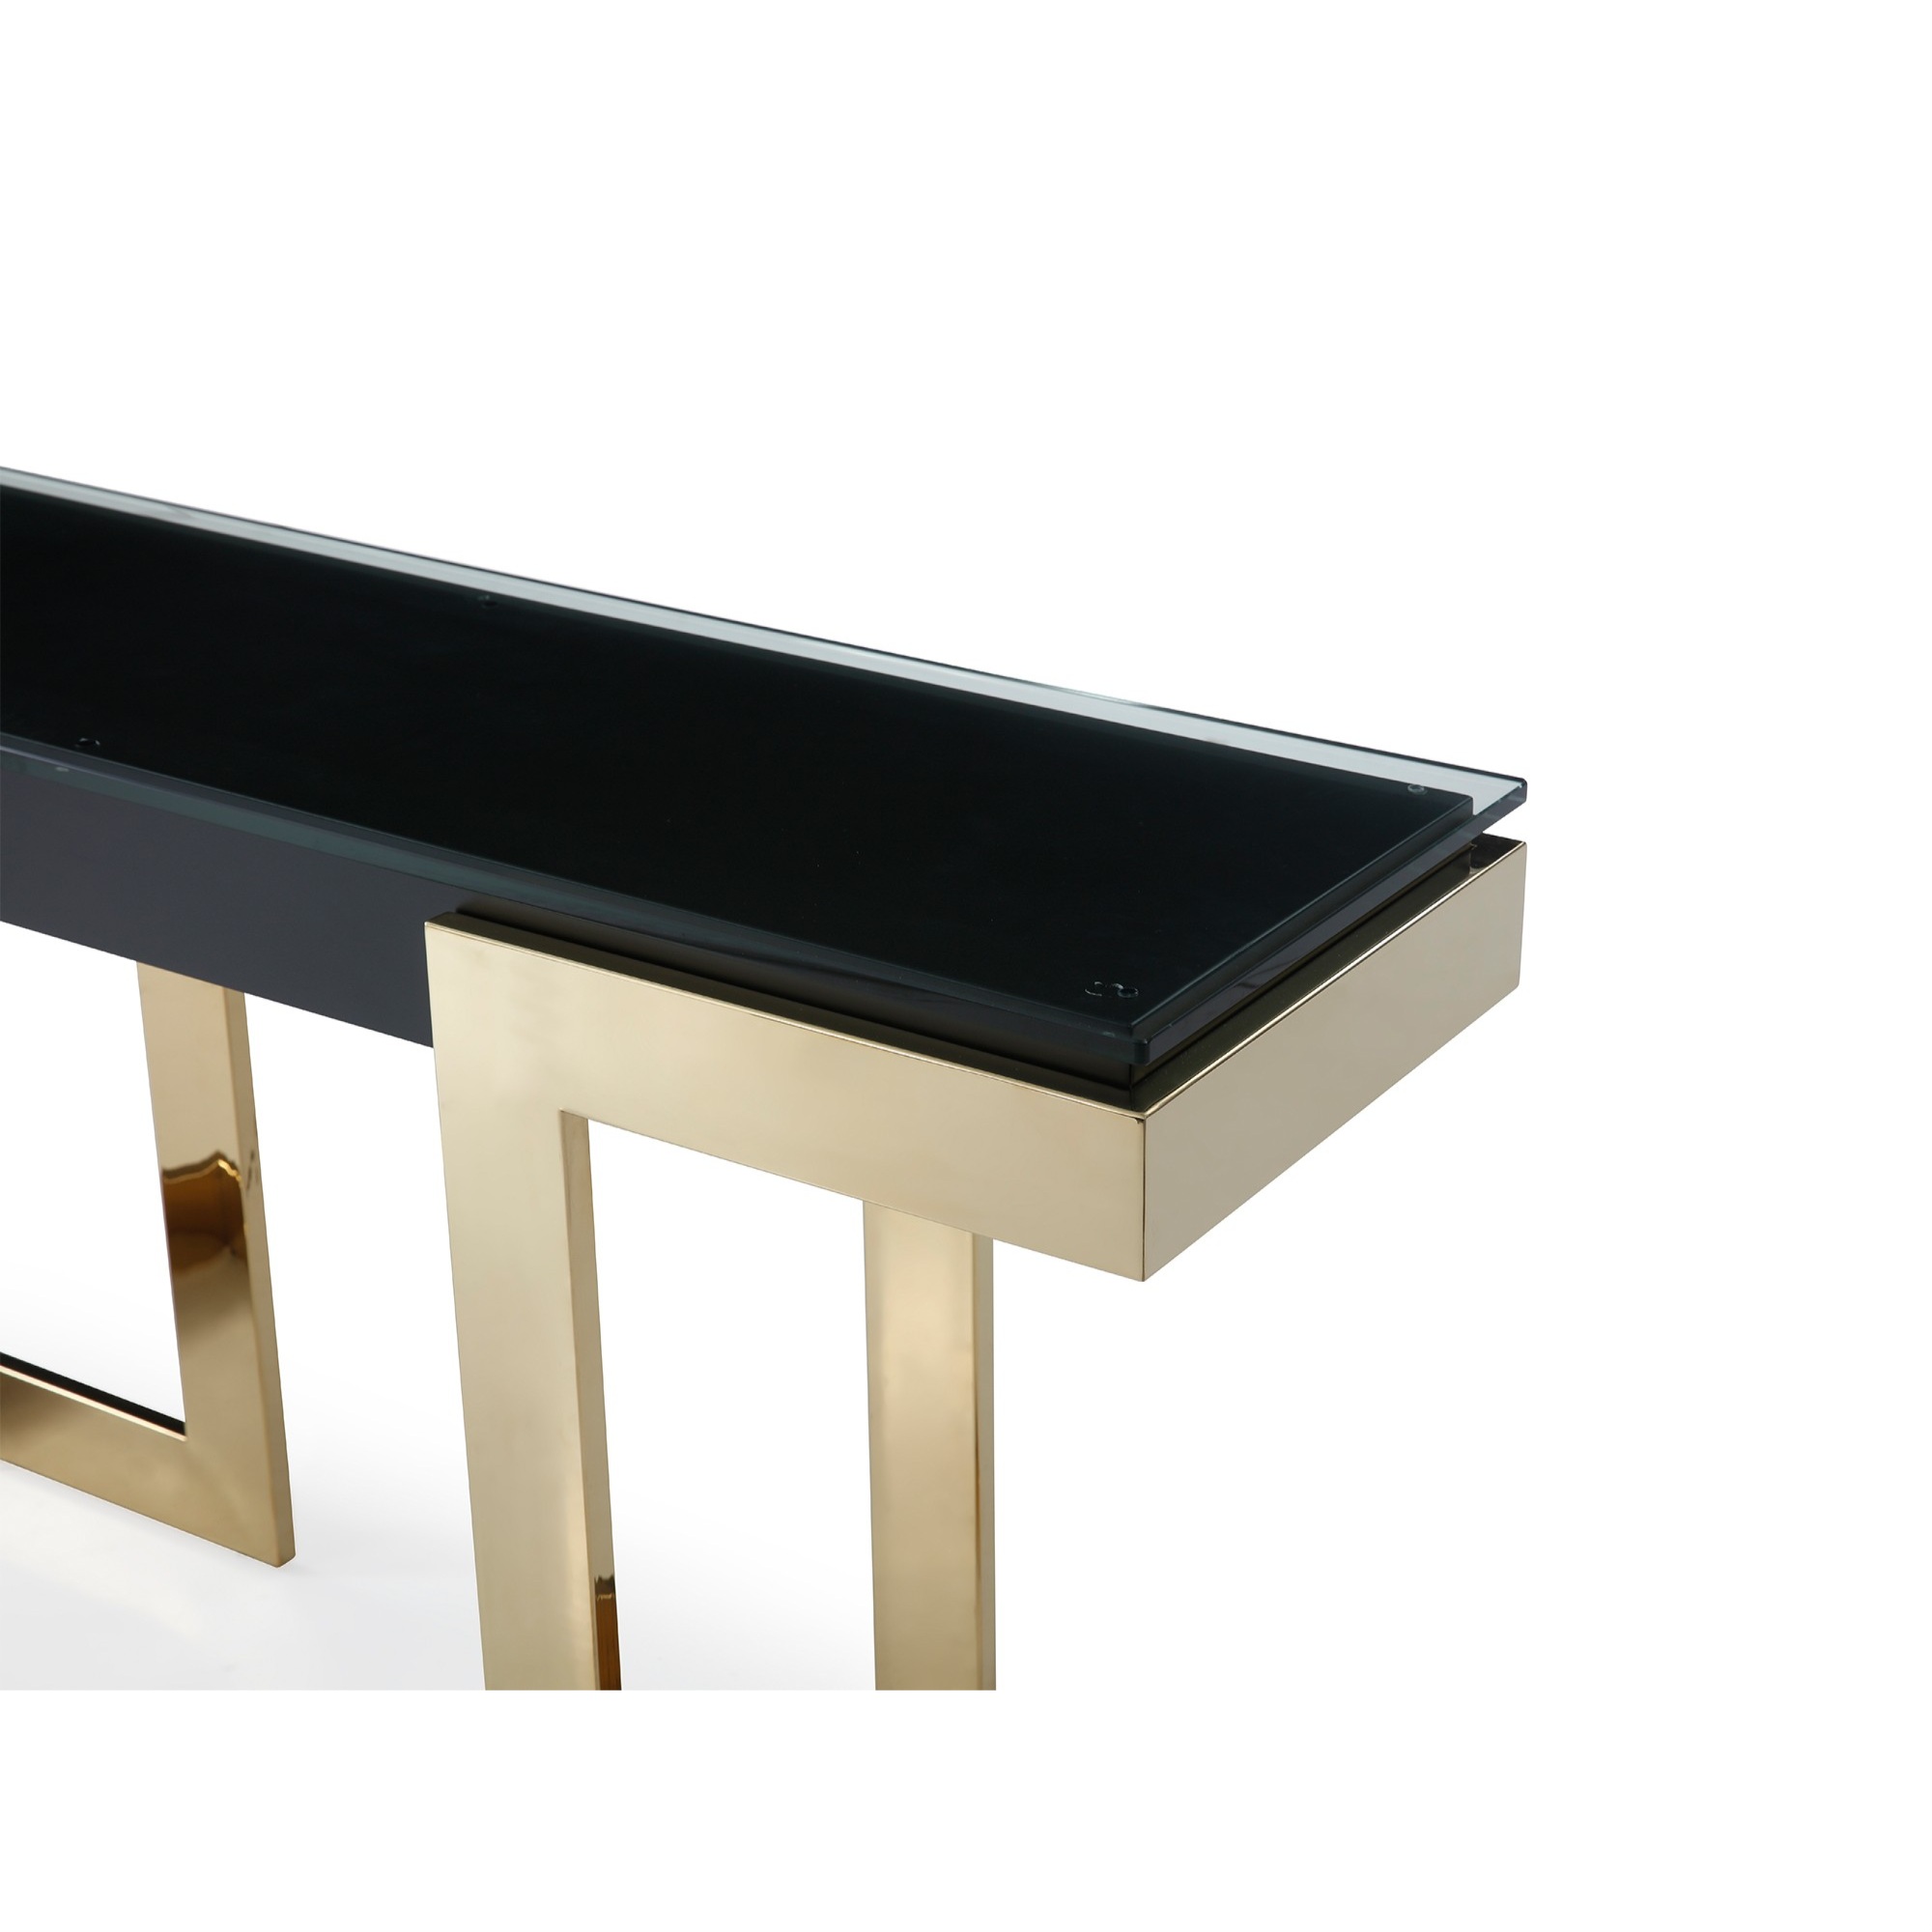 Sumo Console, 10mm glass top, Connector in black, Polished gold stainless base. - image 3 of 4